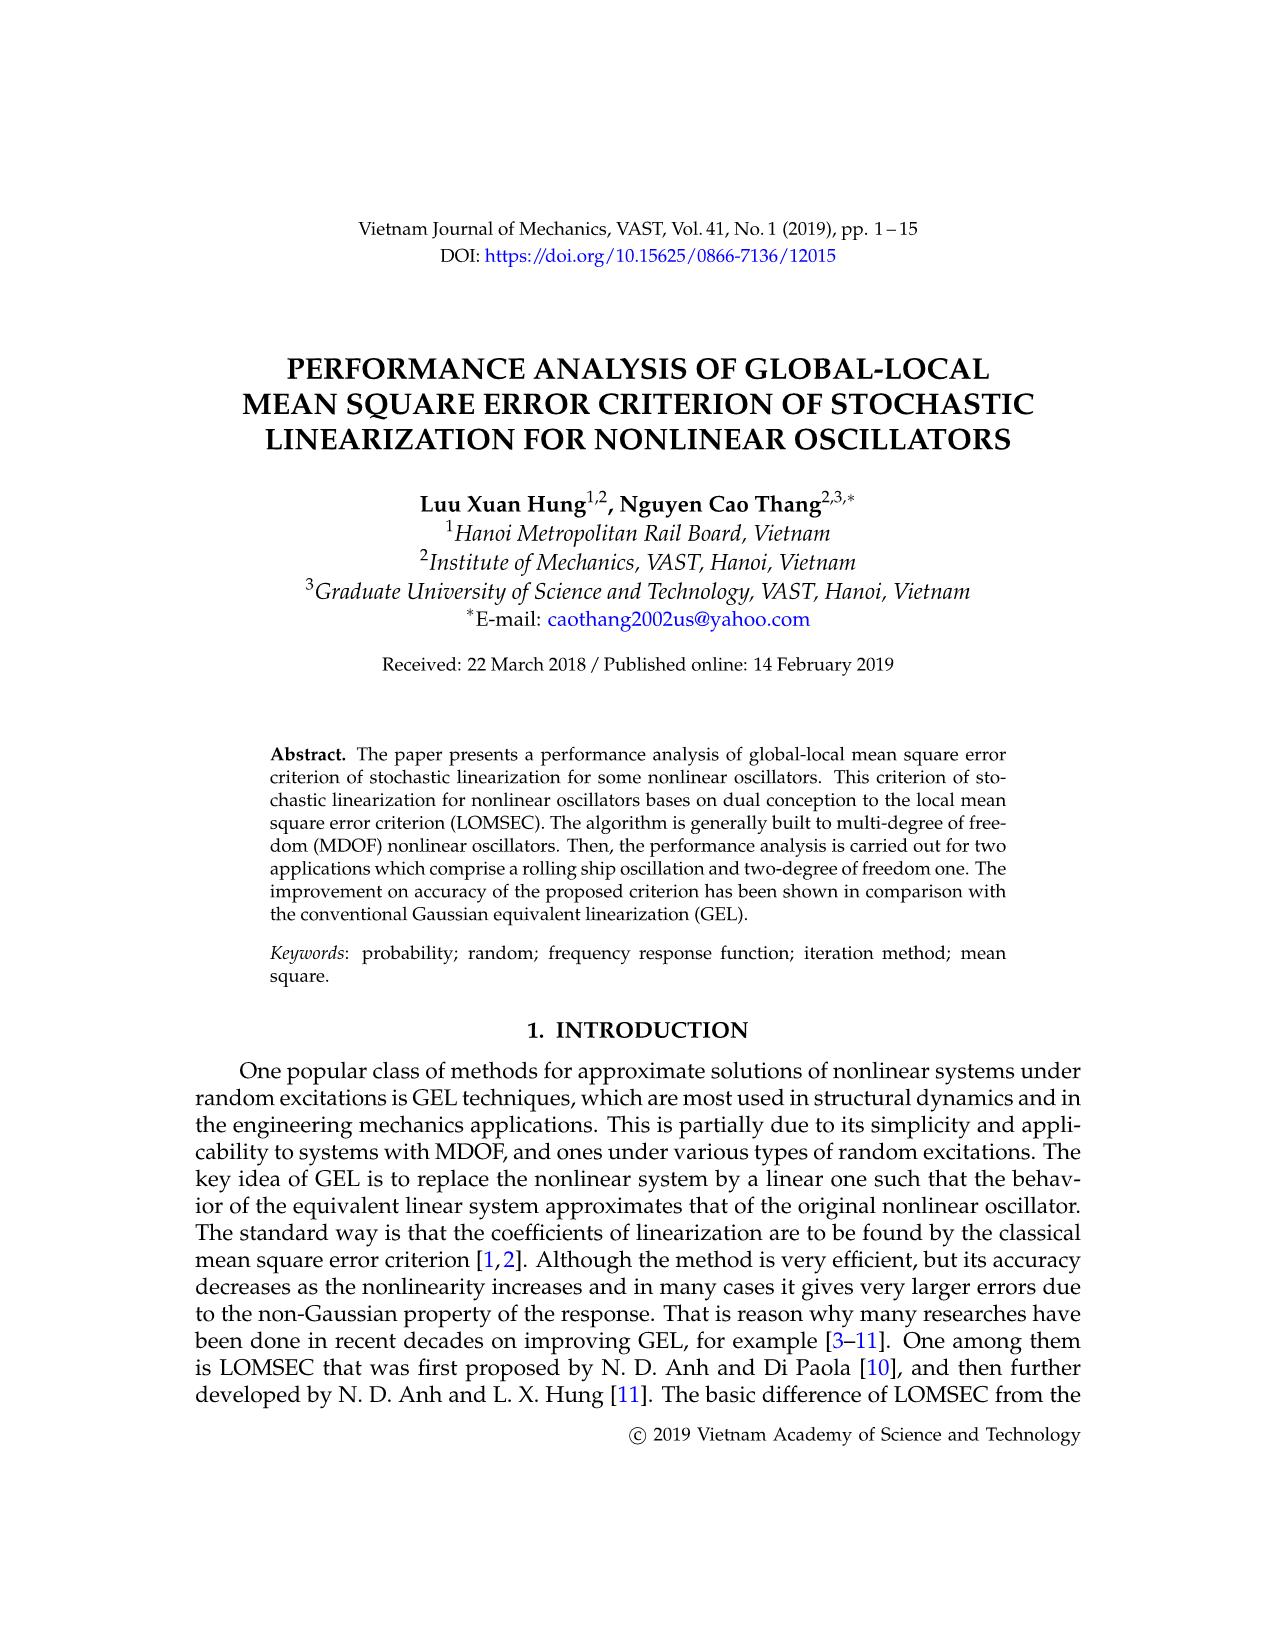 Performance analysis of global - local mean square error criterion of stochastic linearization for nonlinear oscillators trang 1